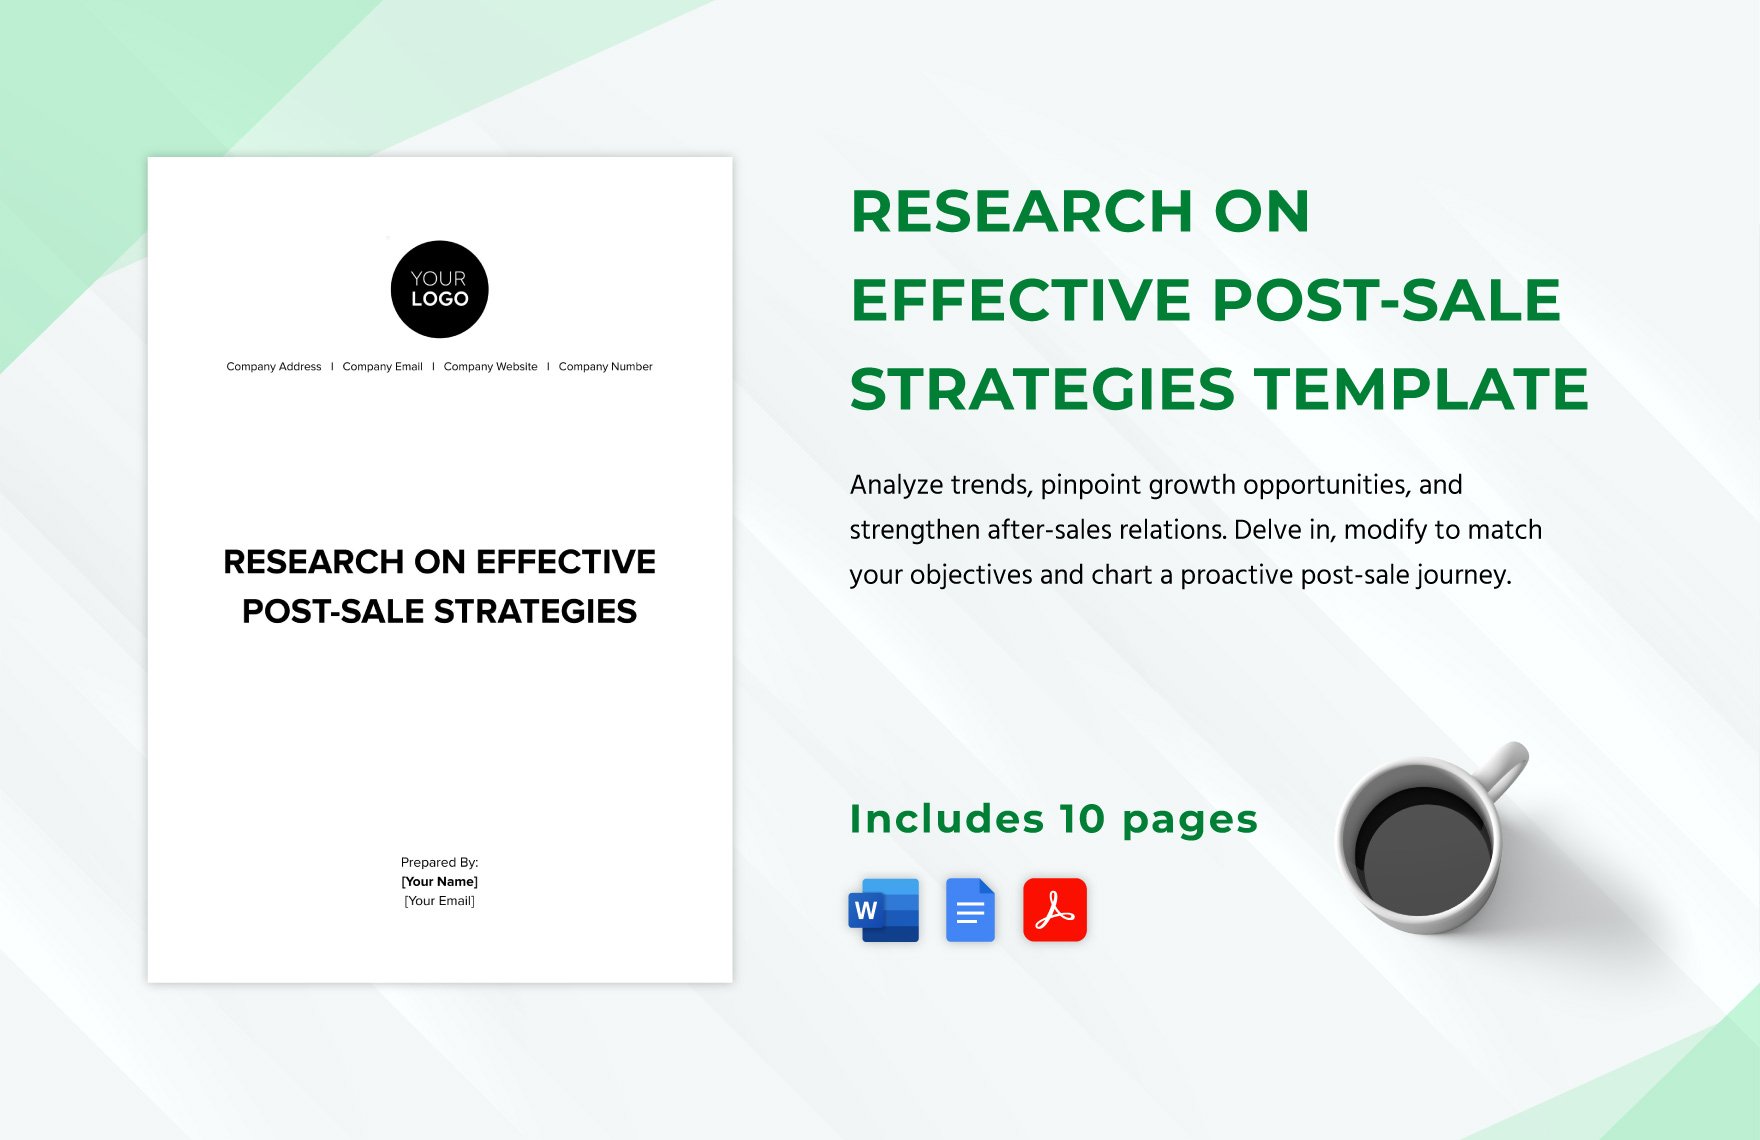 D2Research on Effective Post-Sale Strategies Template